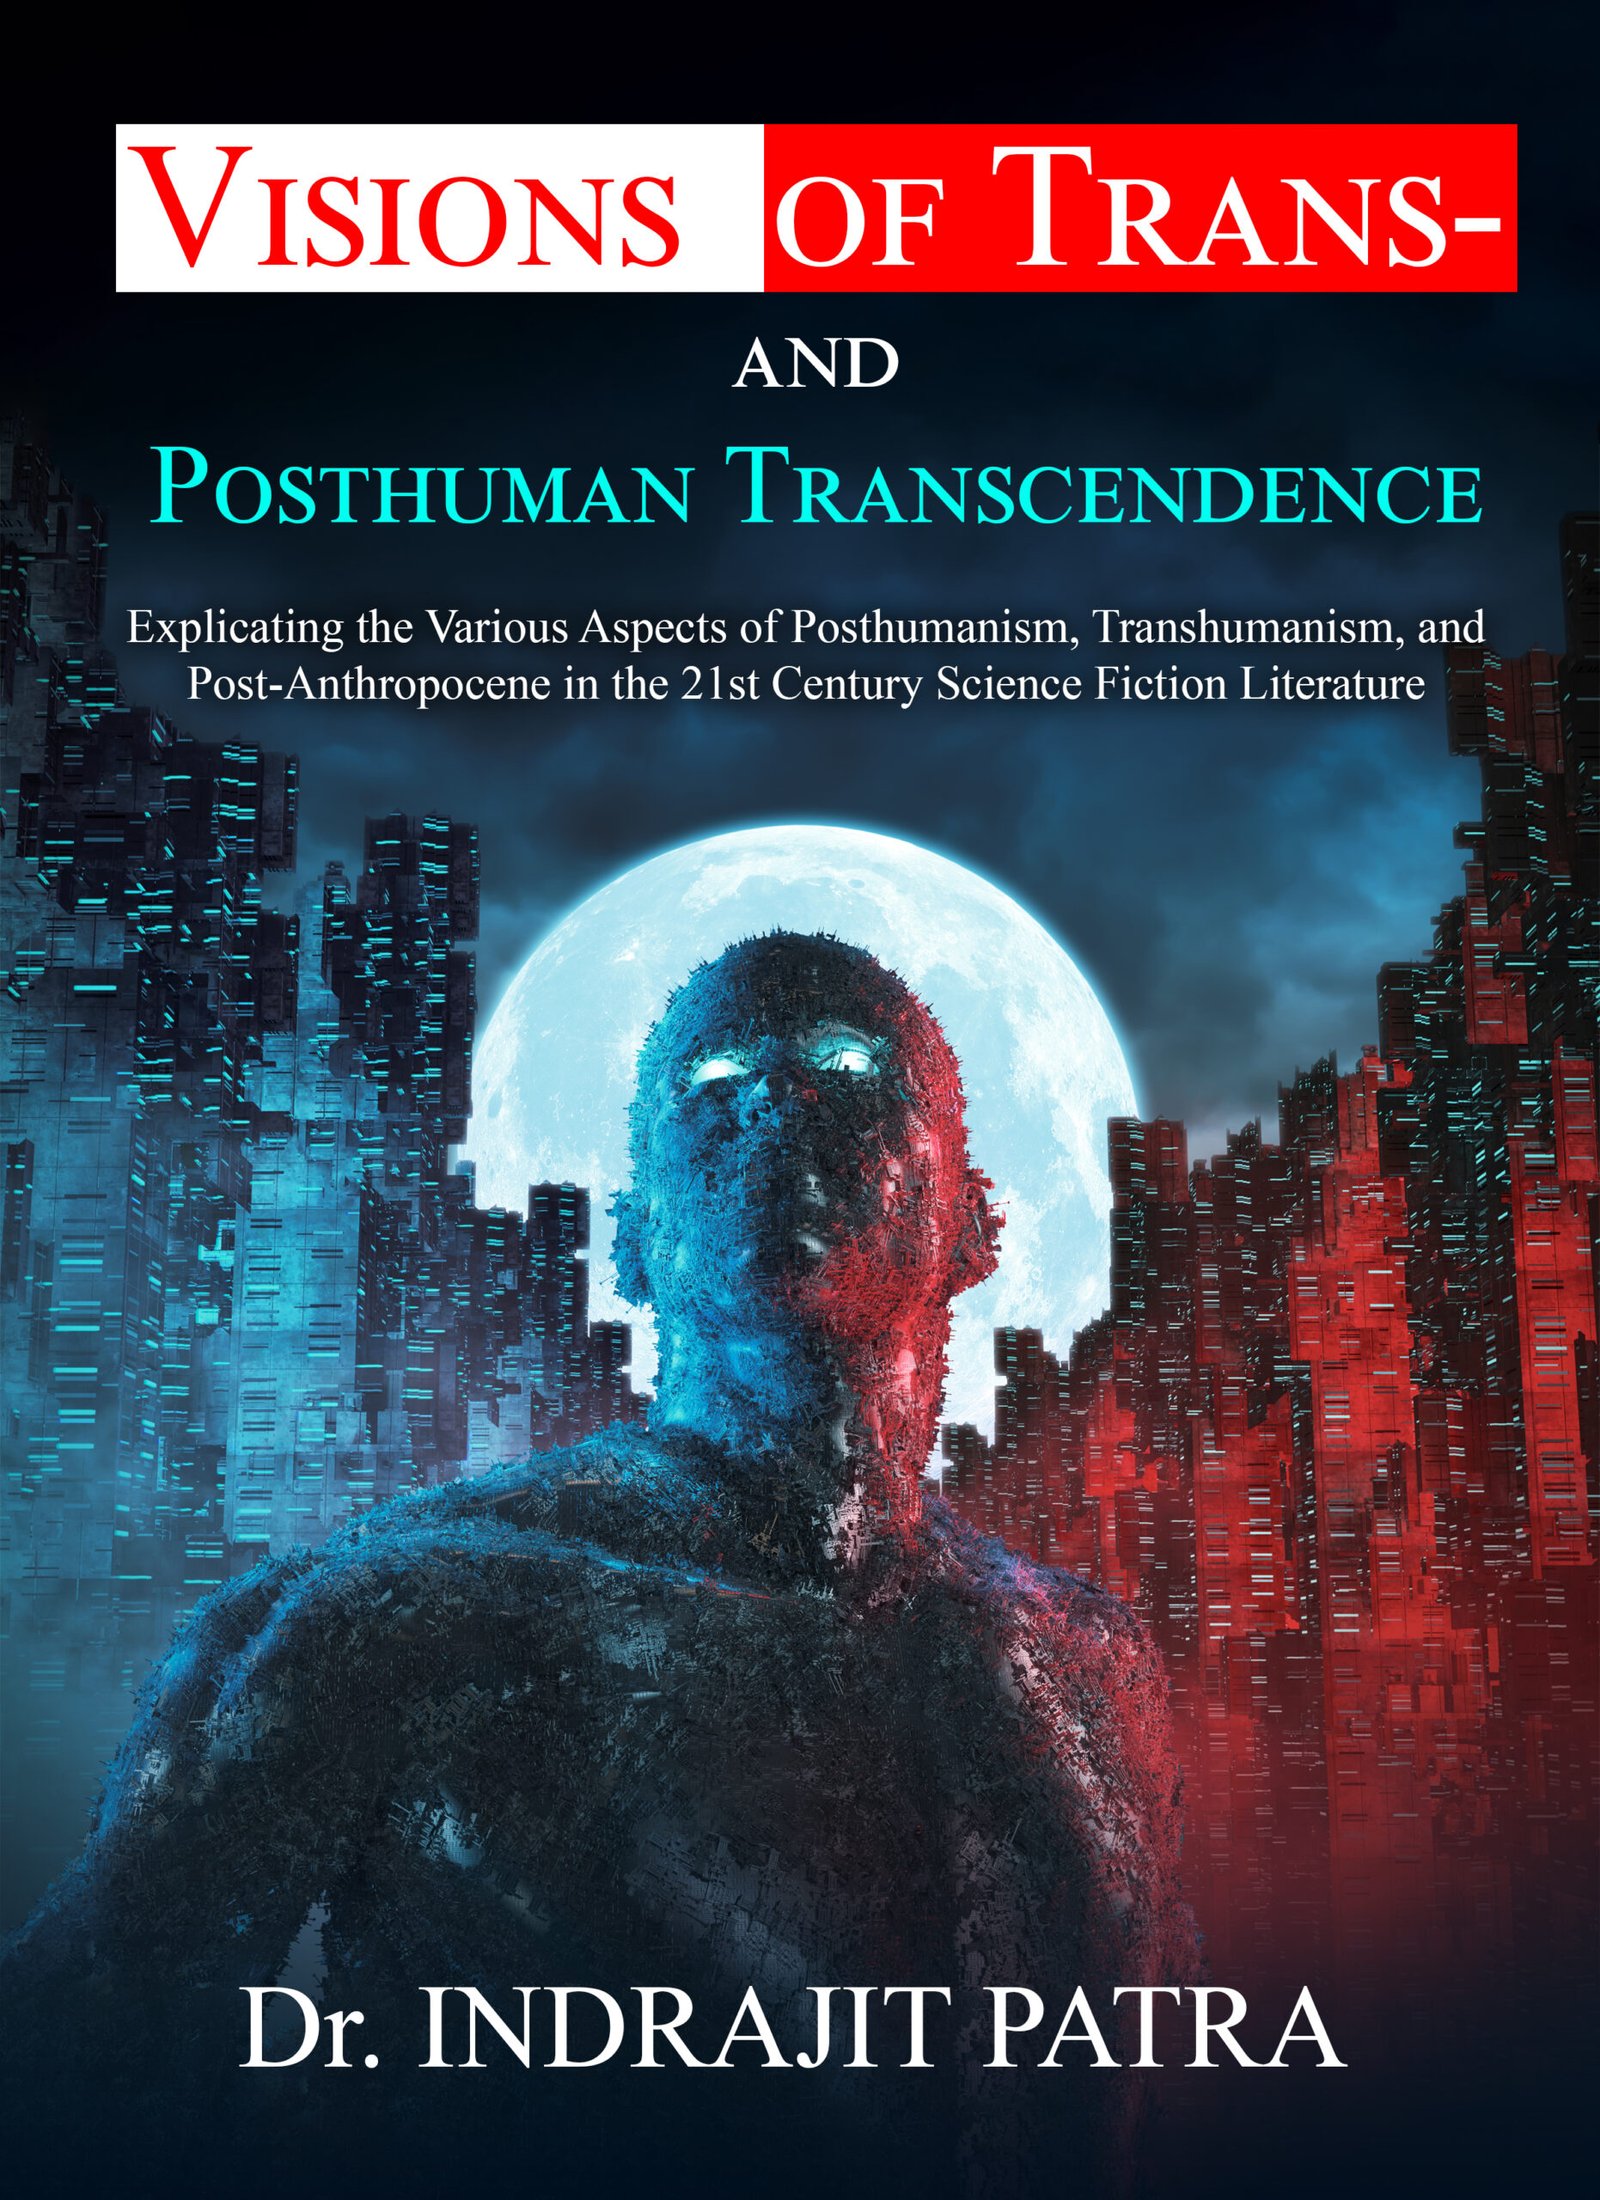 Visions of Trans- and Posthuman Transcendence: Explicating the Various Aspects of Posthumanism, Transhumanism, and Post-Anthropocene in the 21st Century Science Fiction Literature by (Dr. Indrajit Patra)